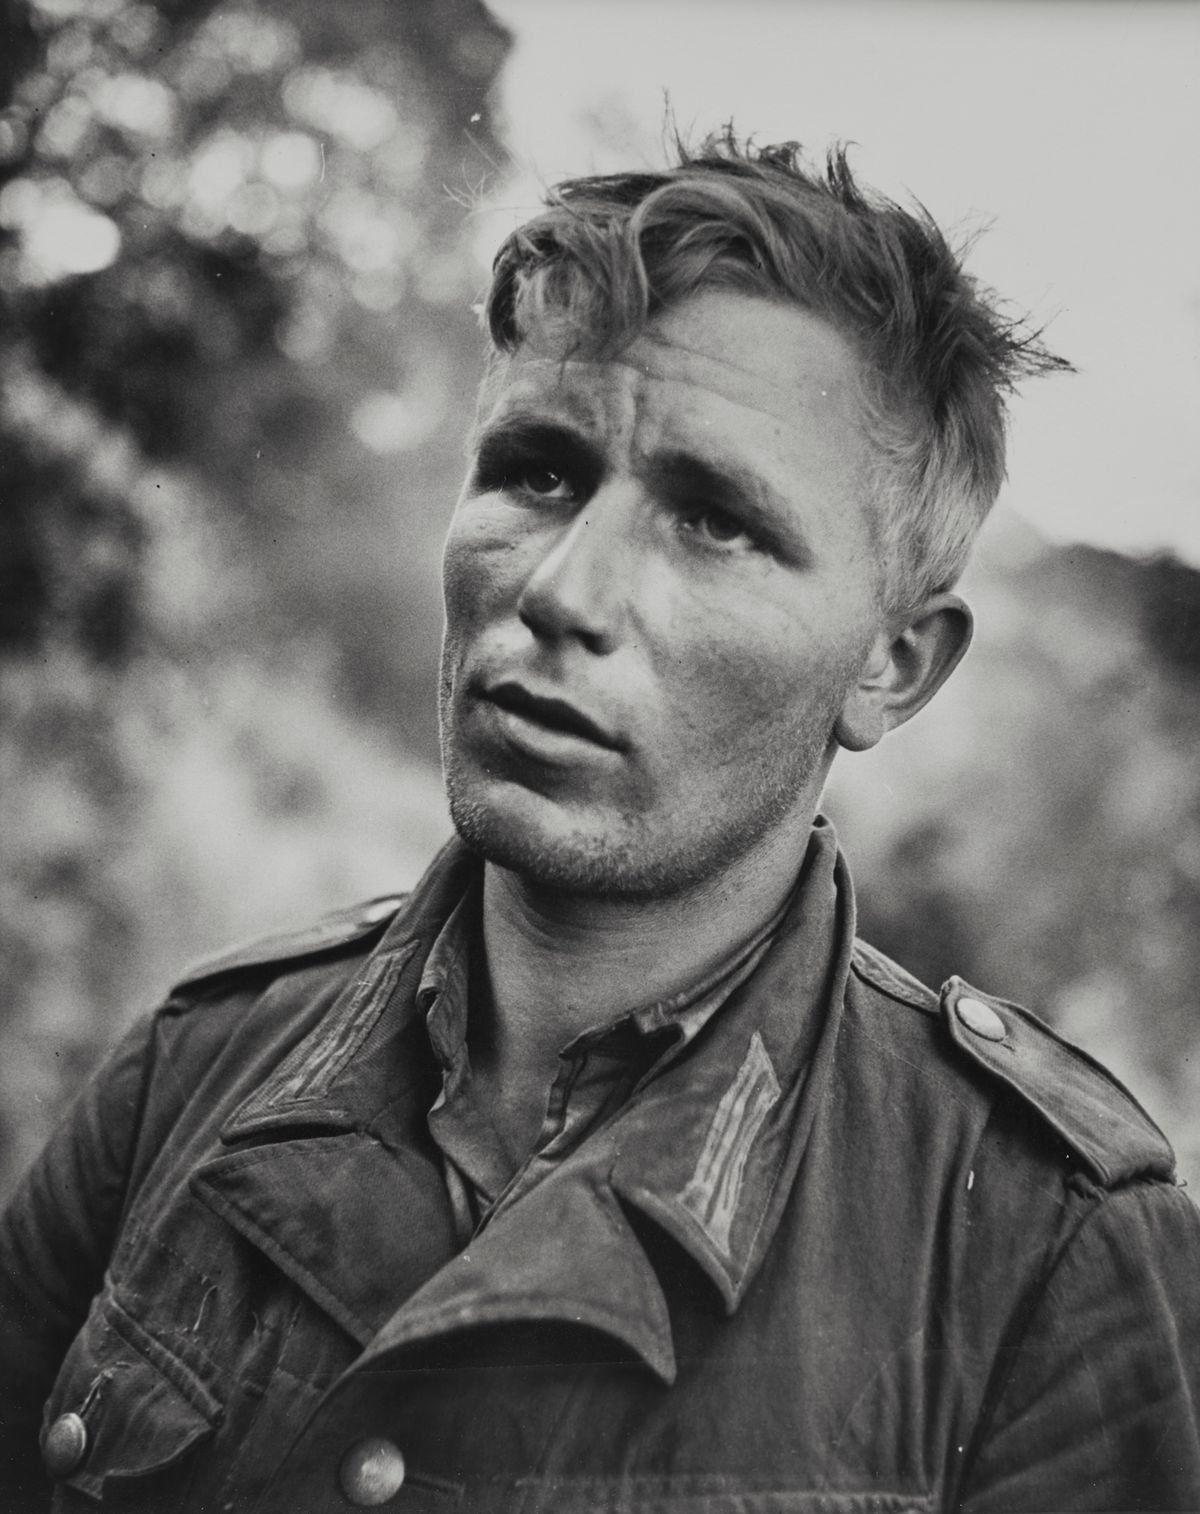 Robert Capa, A German soldier captured by American soldiers, near Nicosia, Italy, July-August, 1943 © Robert Capa © International Center of Photography/Magnum Photos